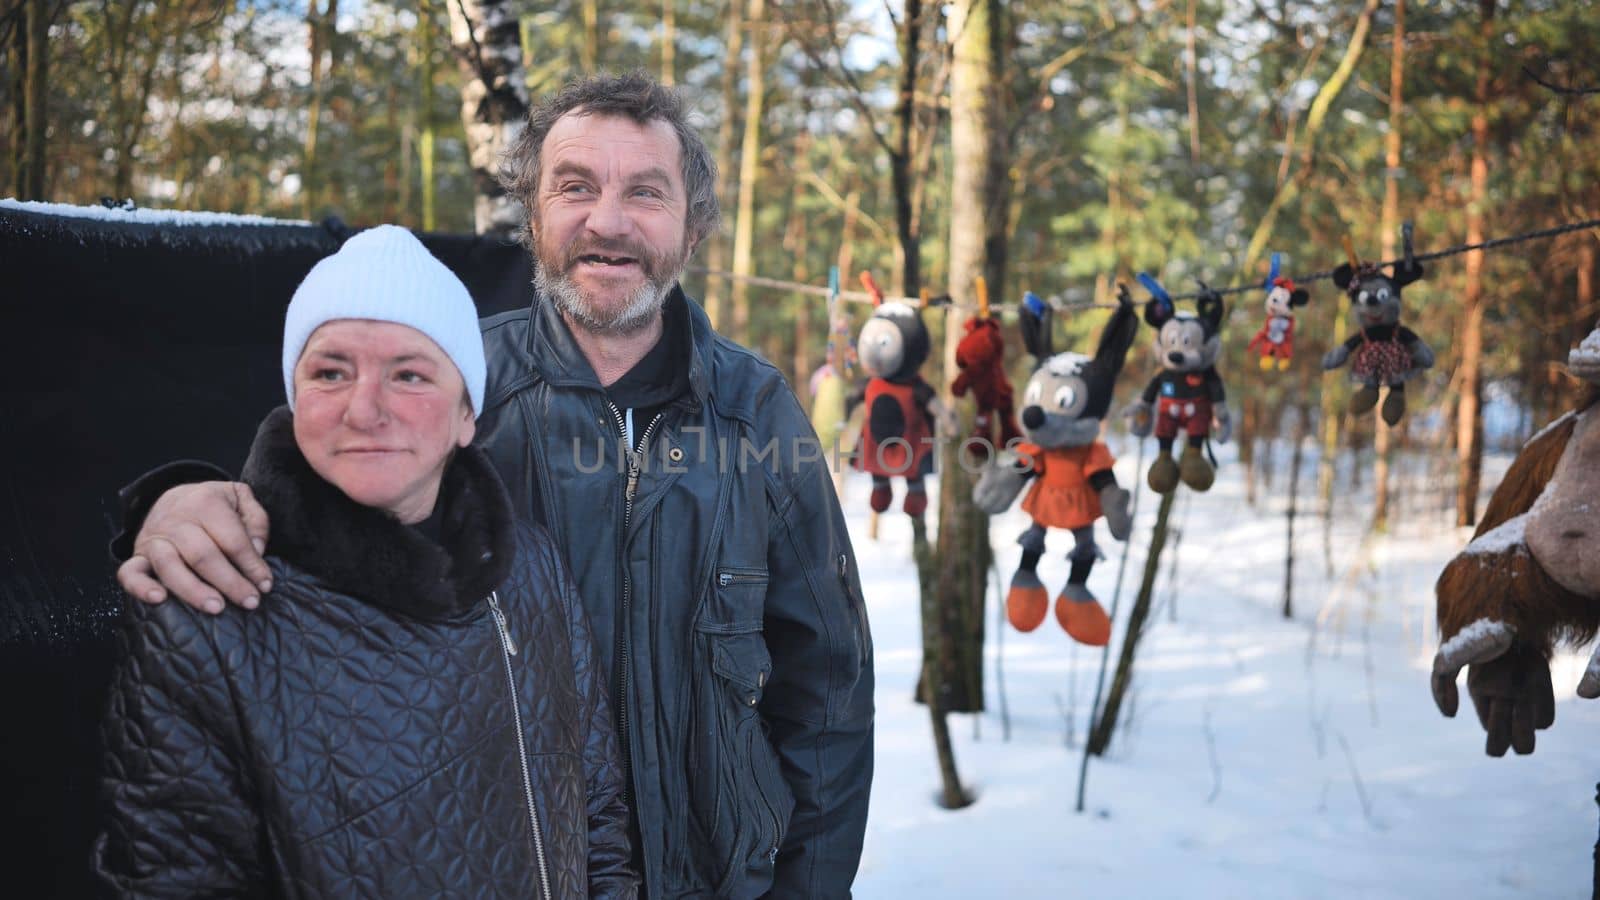 A homeless man and woman giving an interview in the winter in the woods. by DovidPro